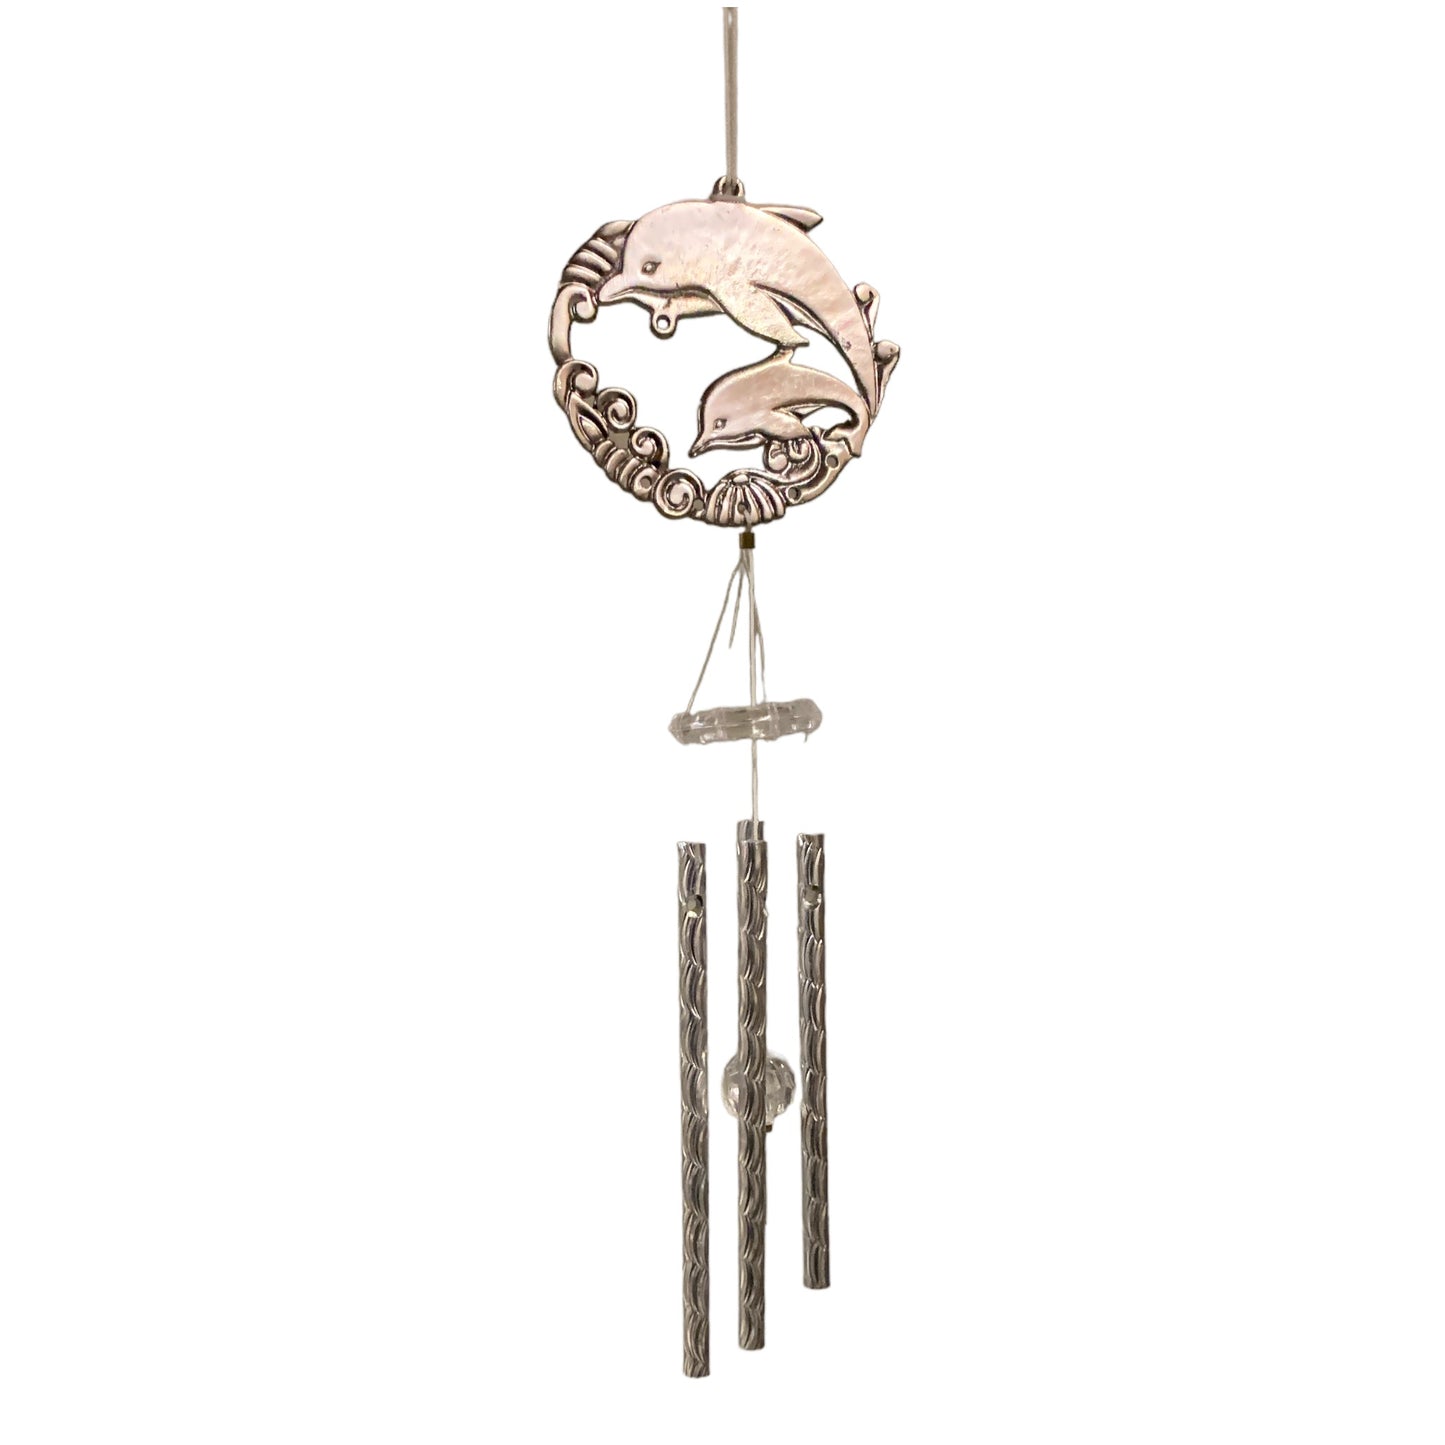 PEWTER MINI DOLPHIN WIND CHIME